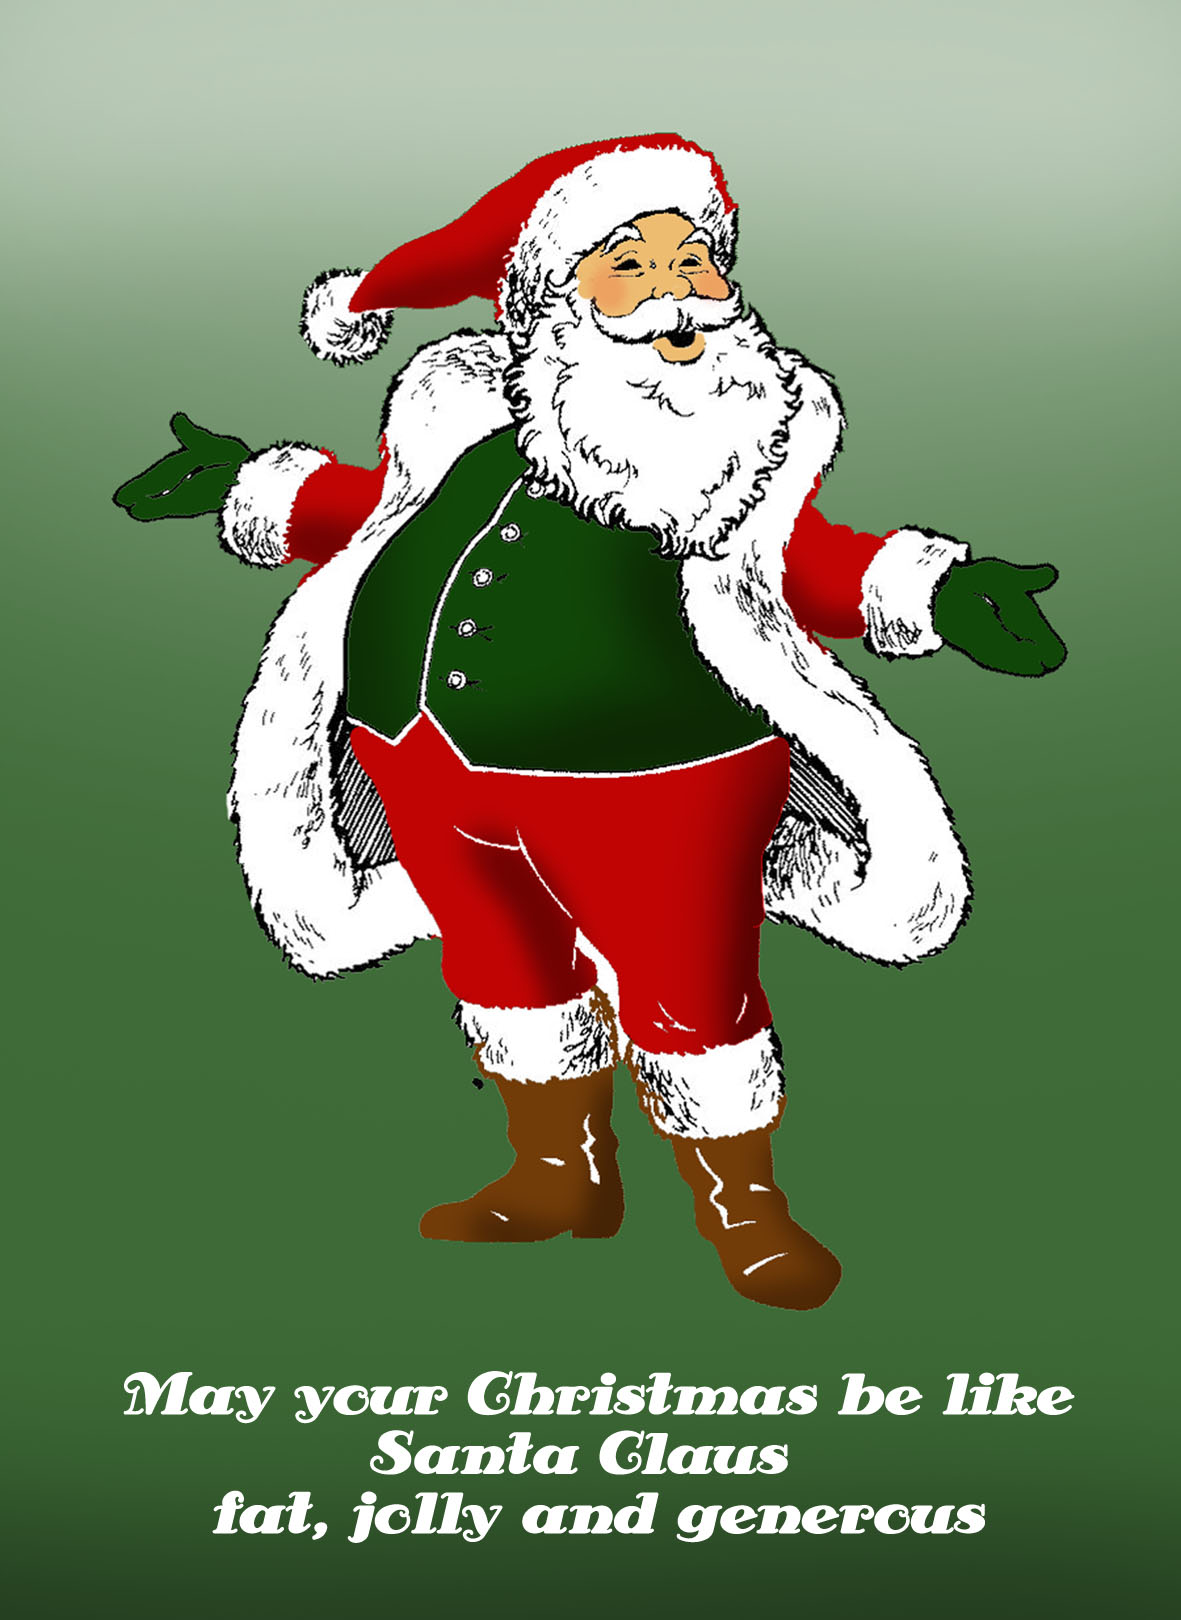 Wonderful Christmas Greetings, Quotes & Poems to Put in Your Cards